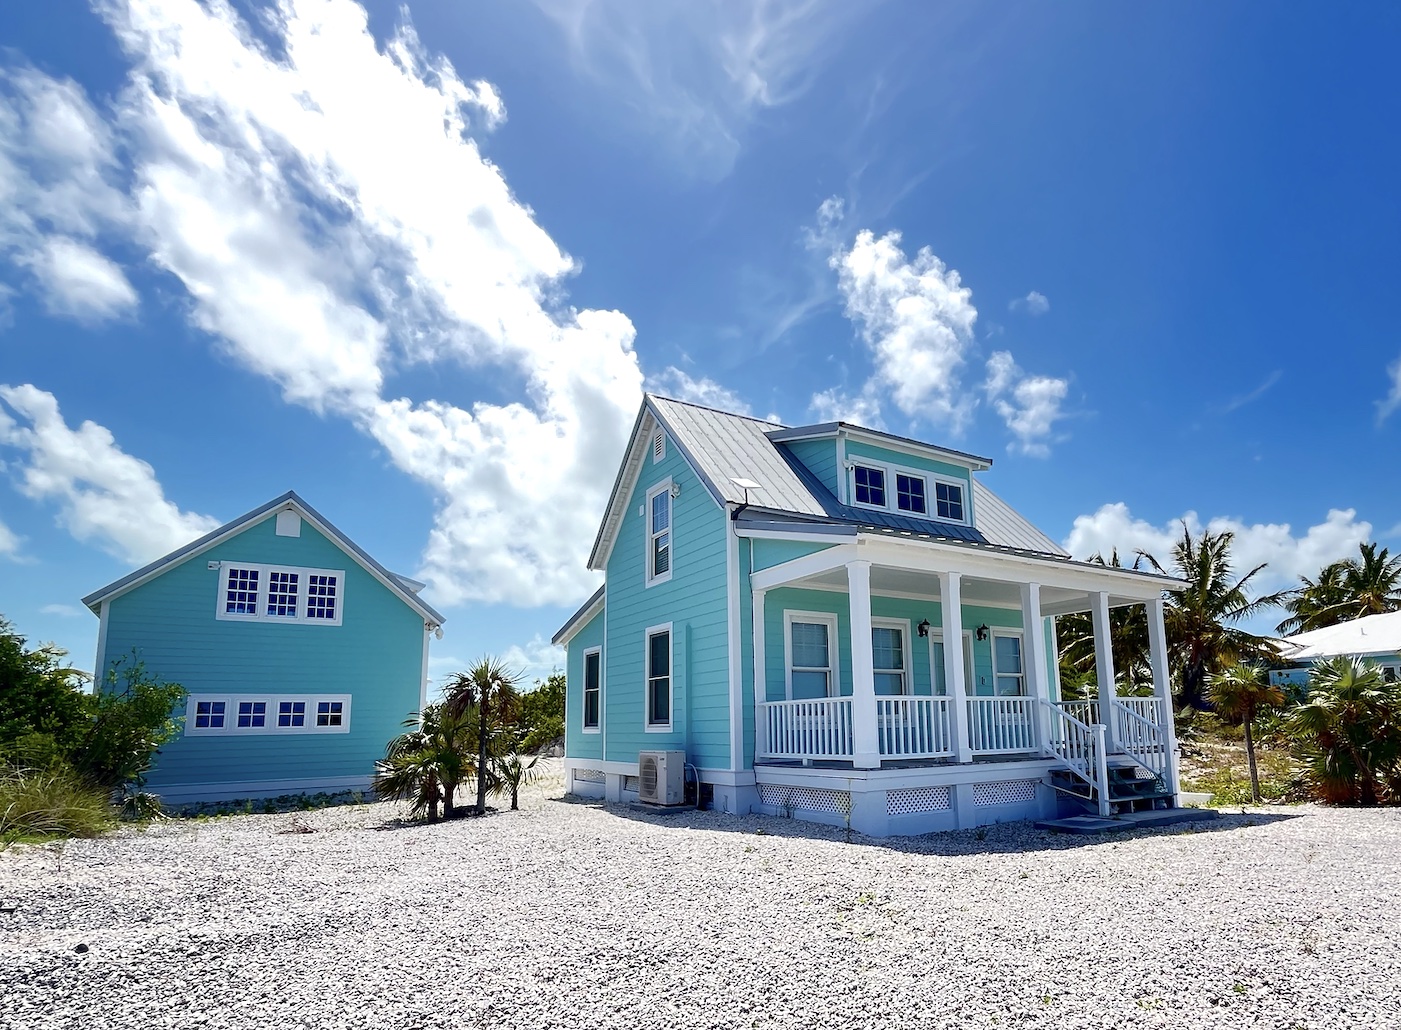 Berry Island Beach Front Home, Berry Islands, Berry Islands, BS, 2 Bedrooms Bedrooms, ,3 BathroomsBathrooms,Residential,For Sale,Berry Island Beach Front Home,1504964